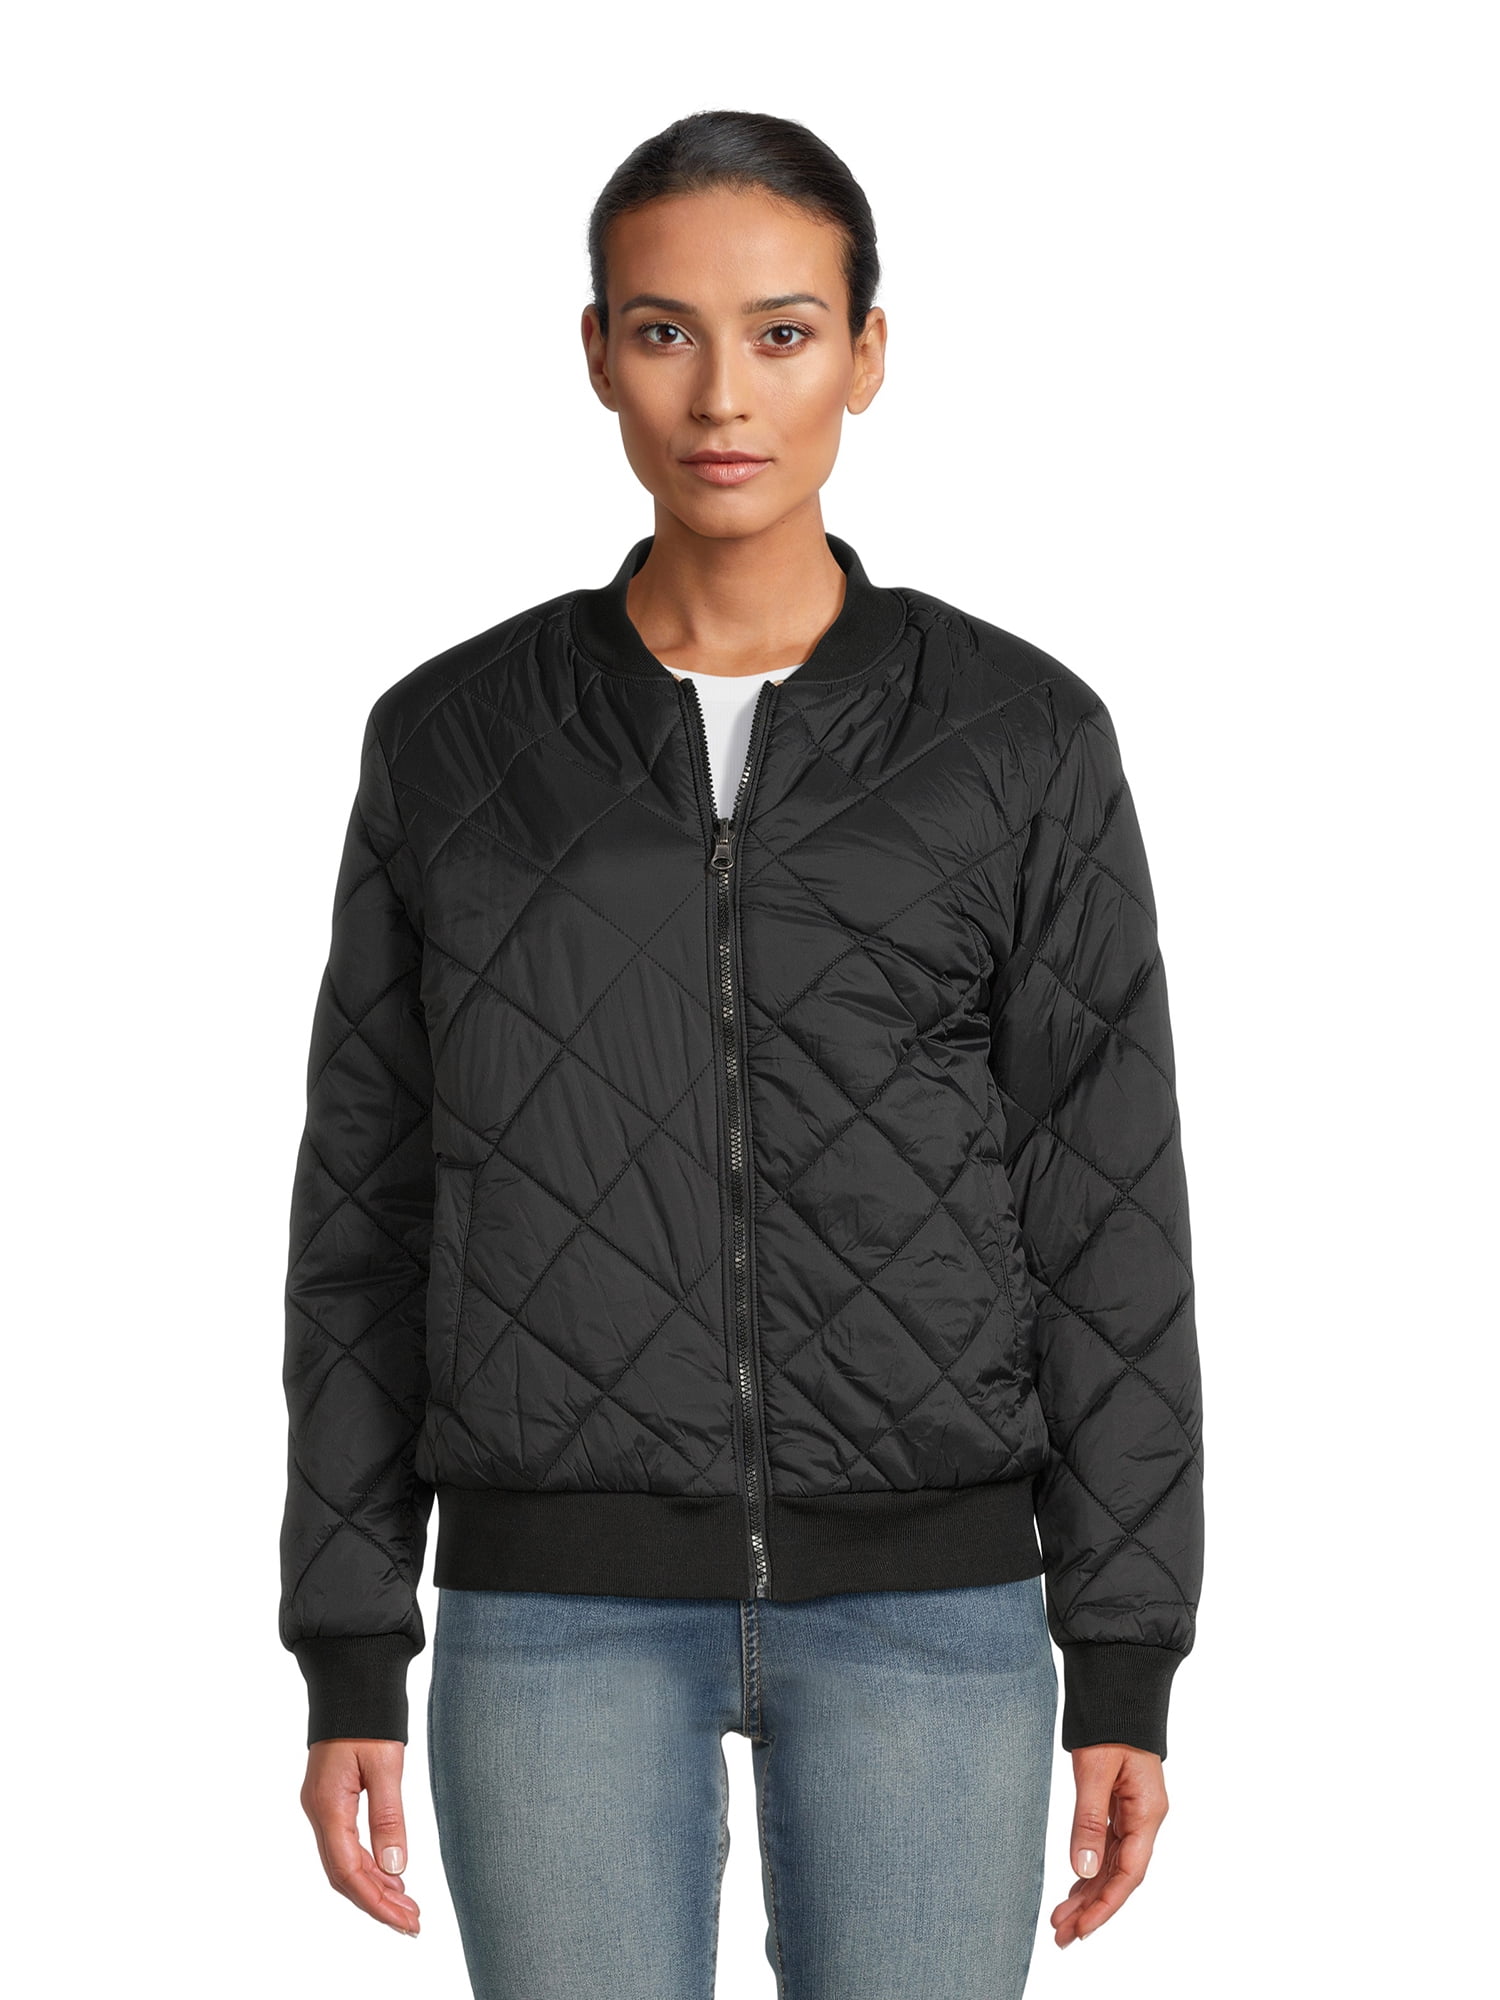 Alyned Together Women's Quilted Reversible Bomber Jacket, Sizes S-3X ...